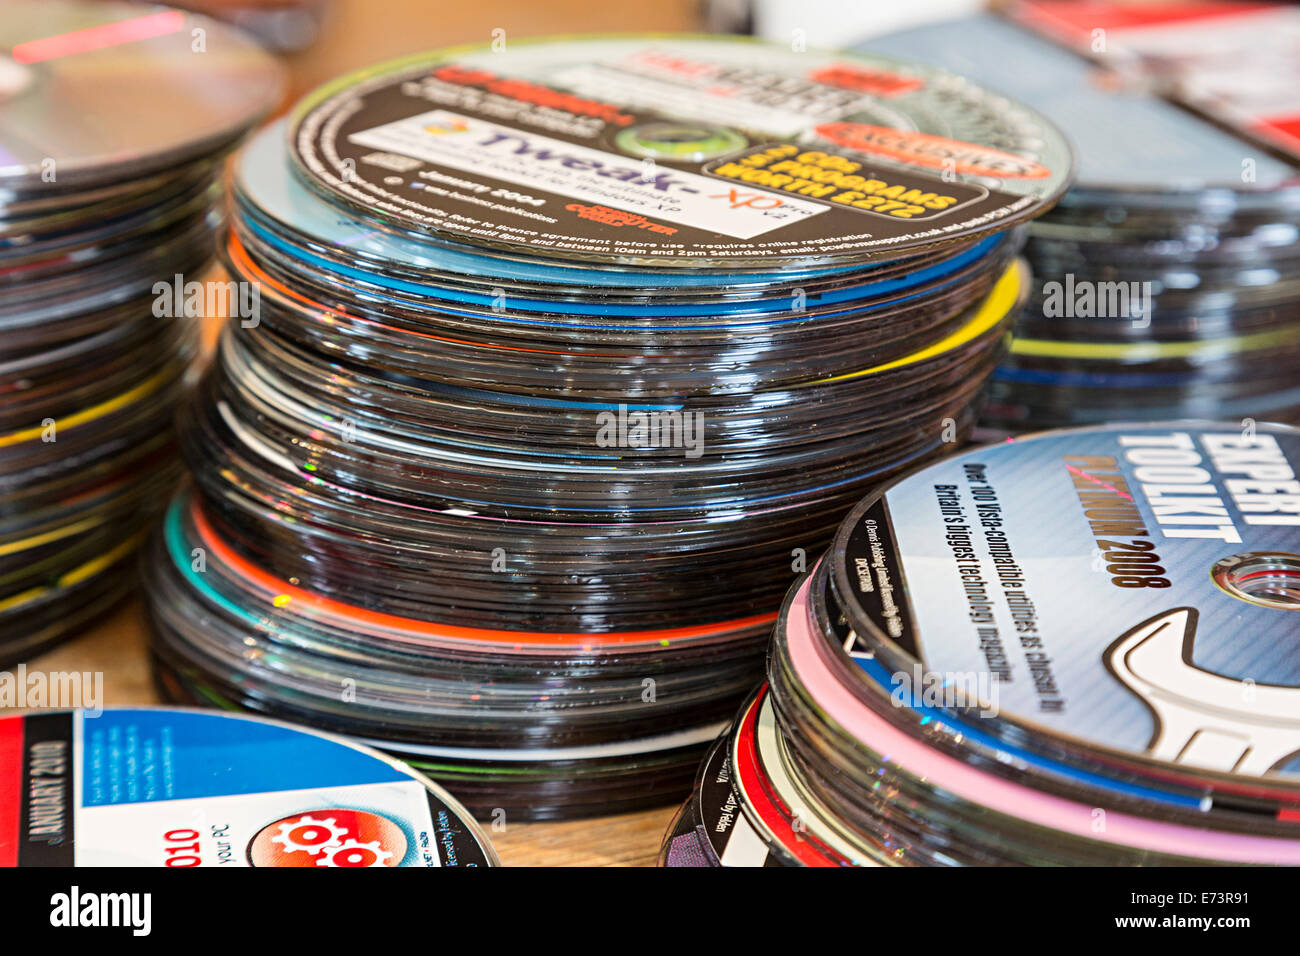 Heaps of old CD-ROM software disks free with computer magazines for disposal Stock Photo